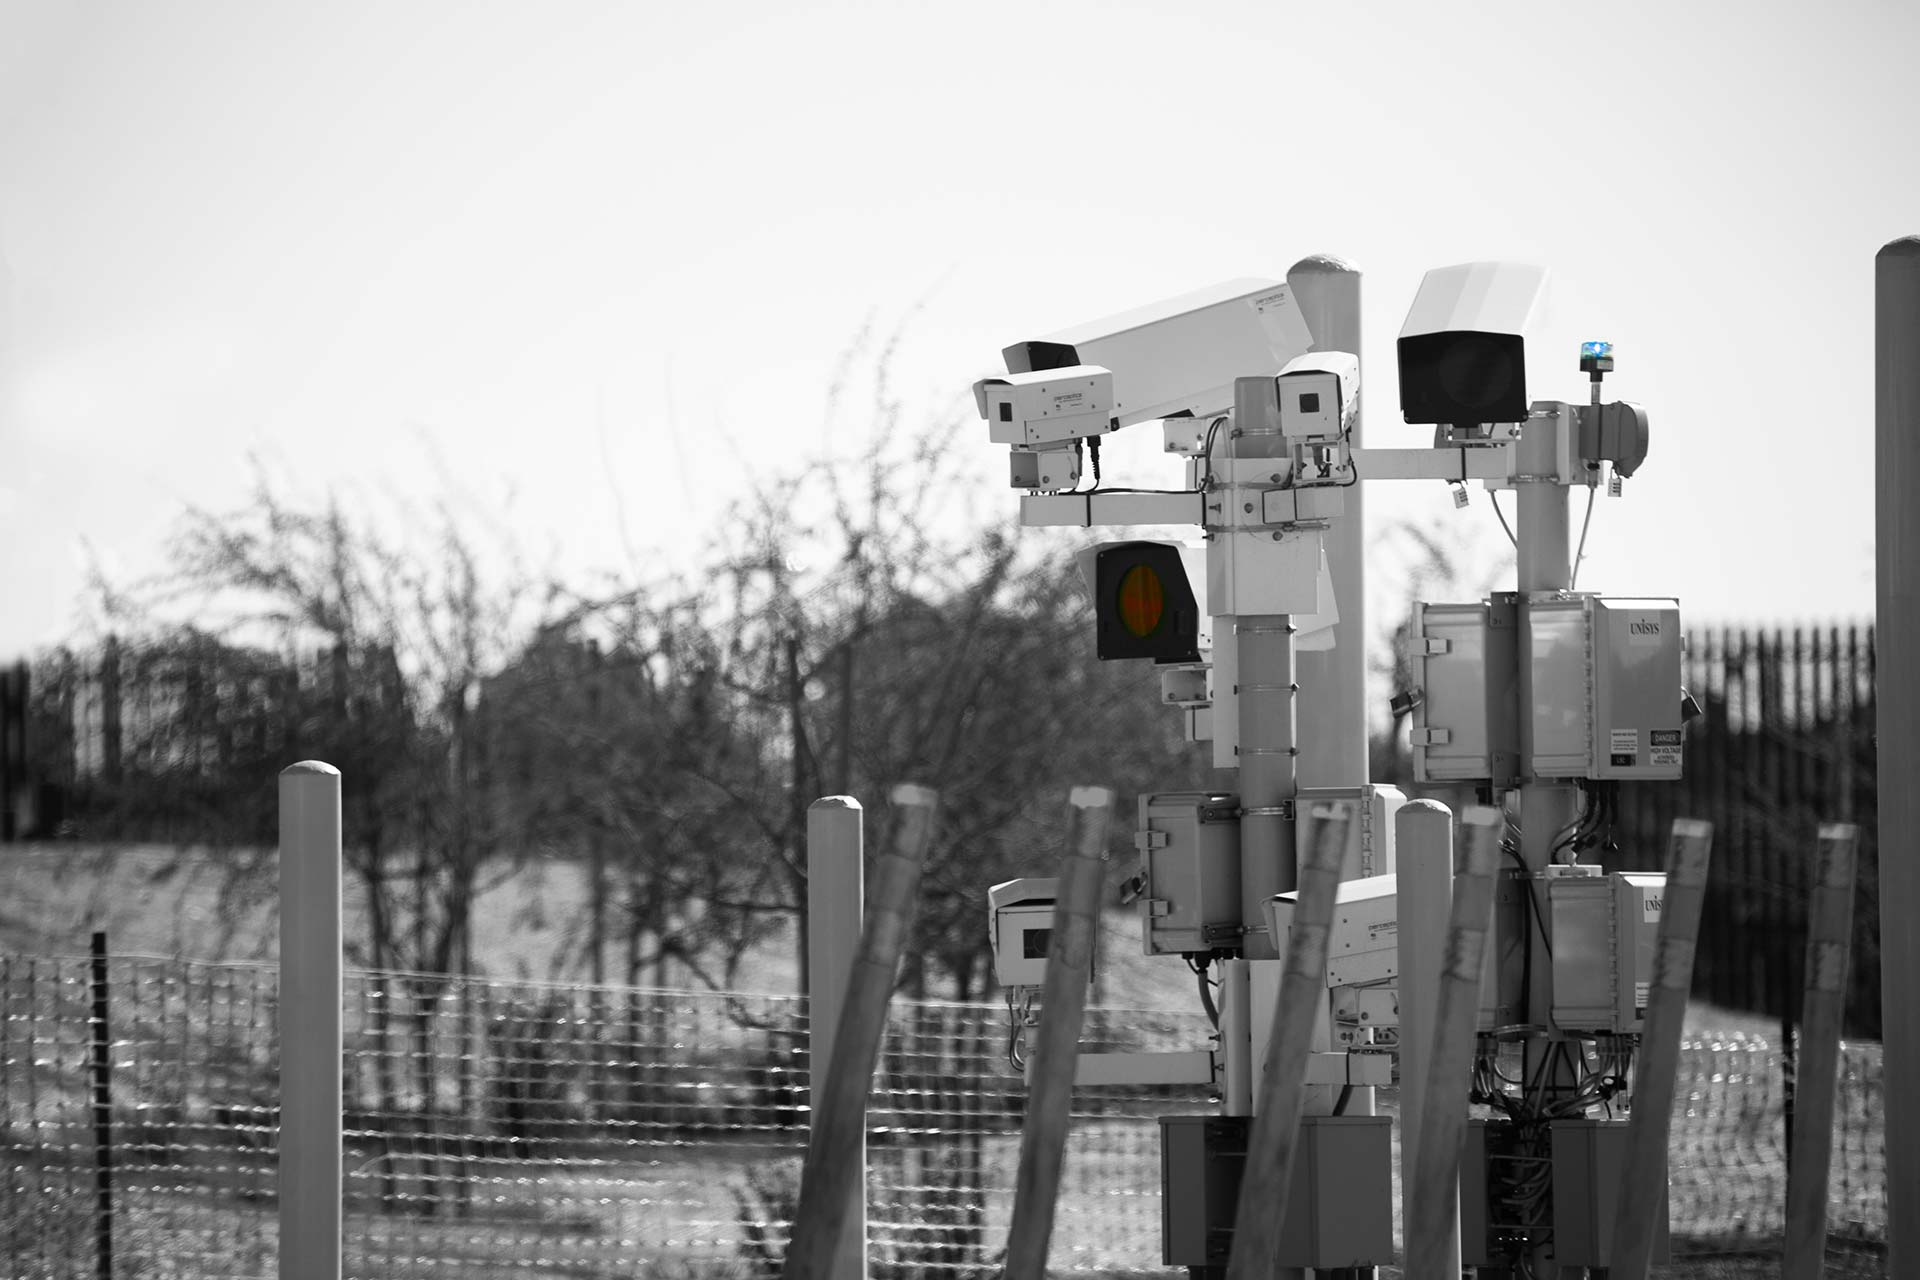 Security cameras and sensors at border fence